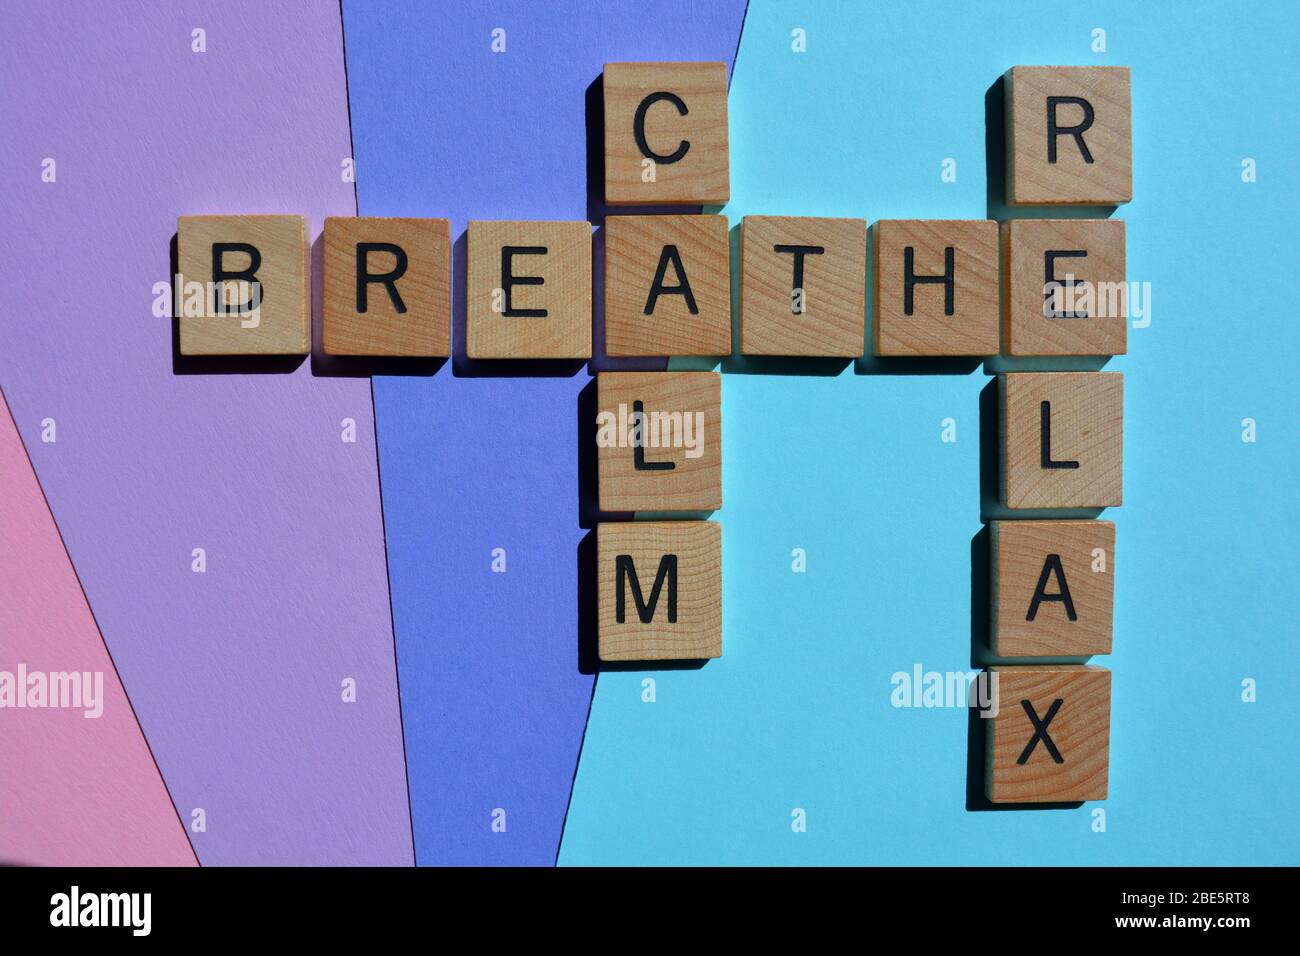 Calm, Breathe, Relax, crossword on colorful background Stock Photo